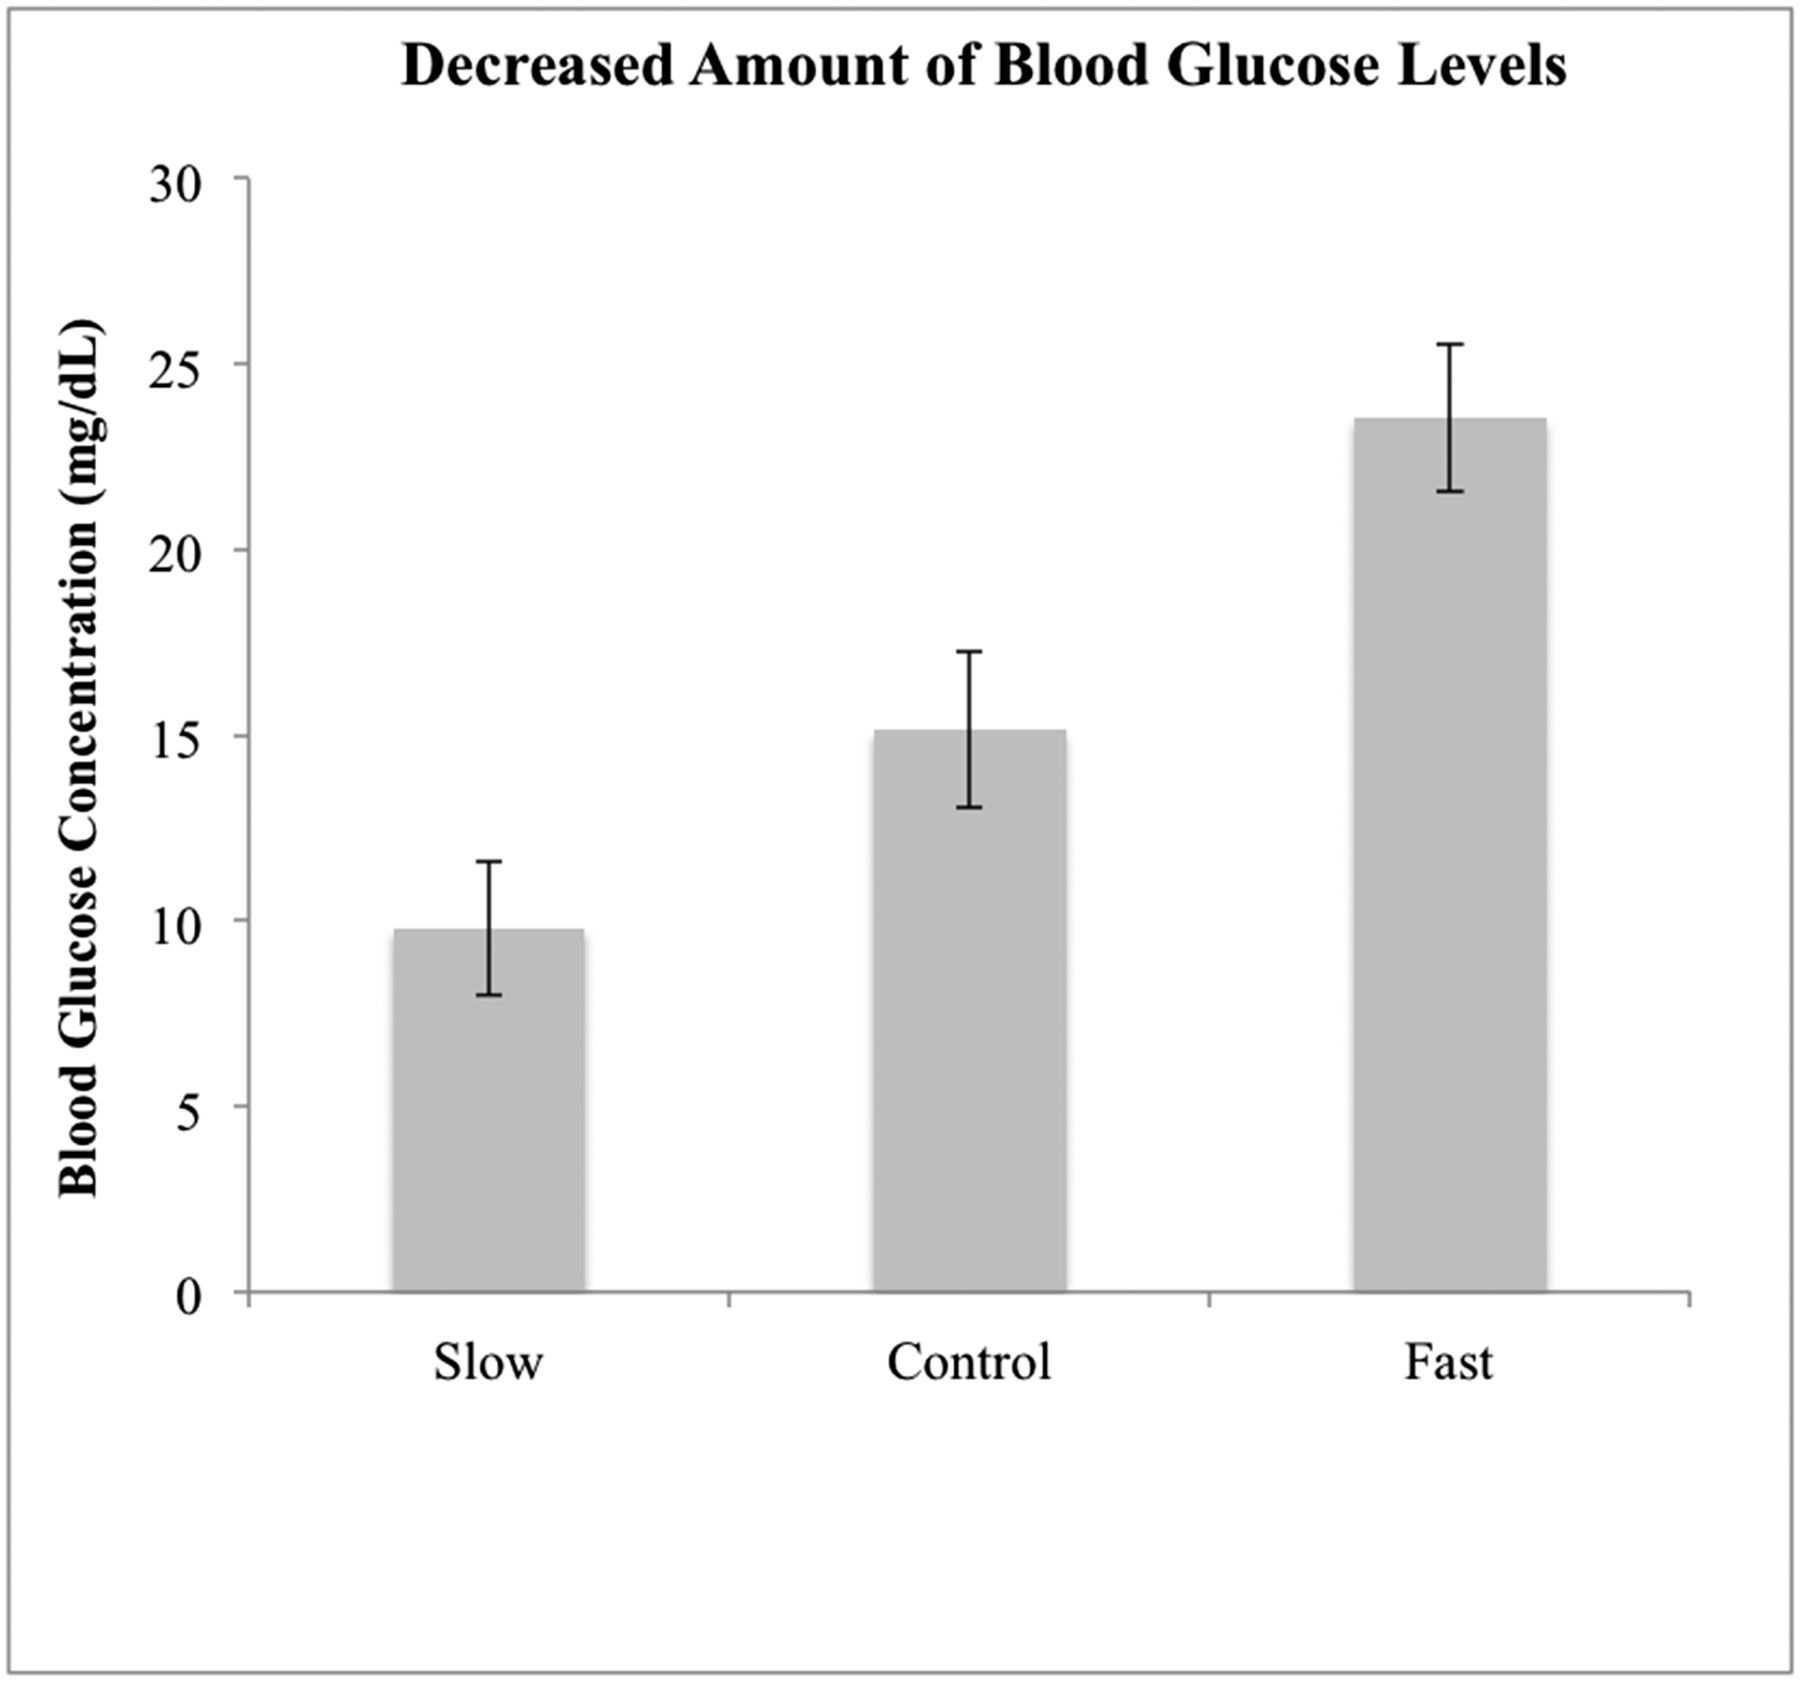 Blood sugar level follows perceived time rather than actual time in diabetics